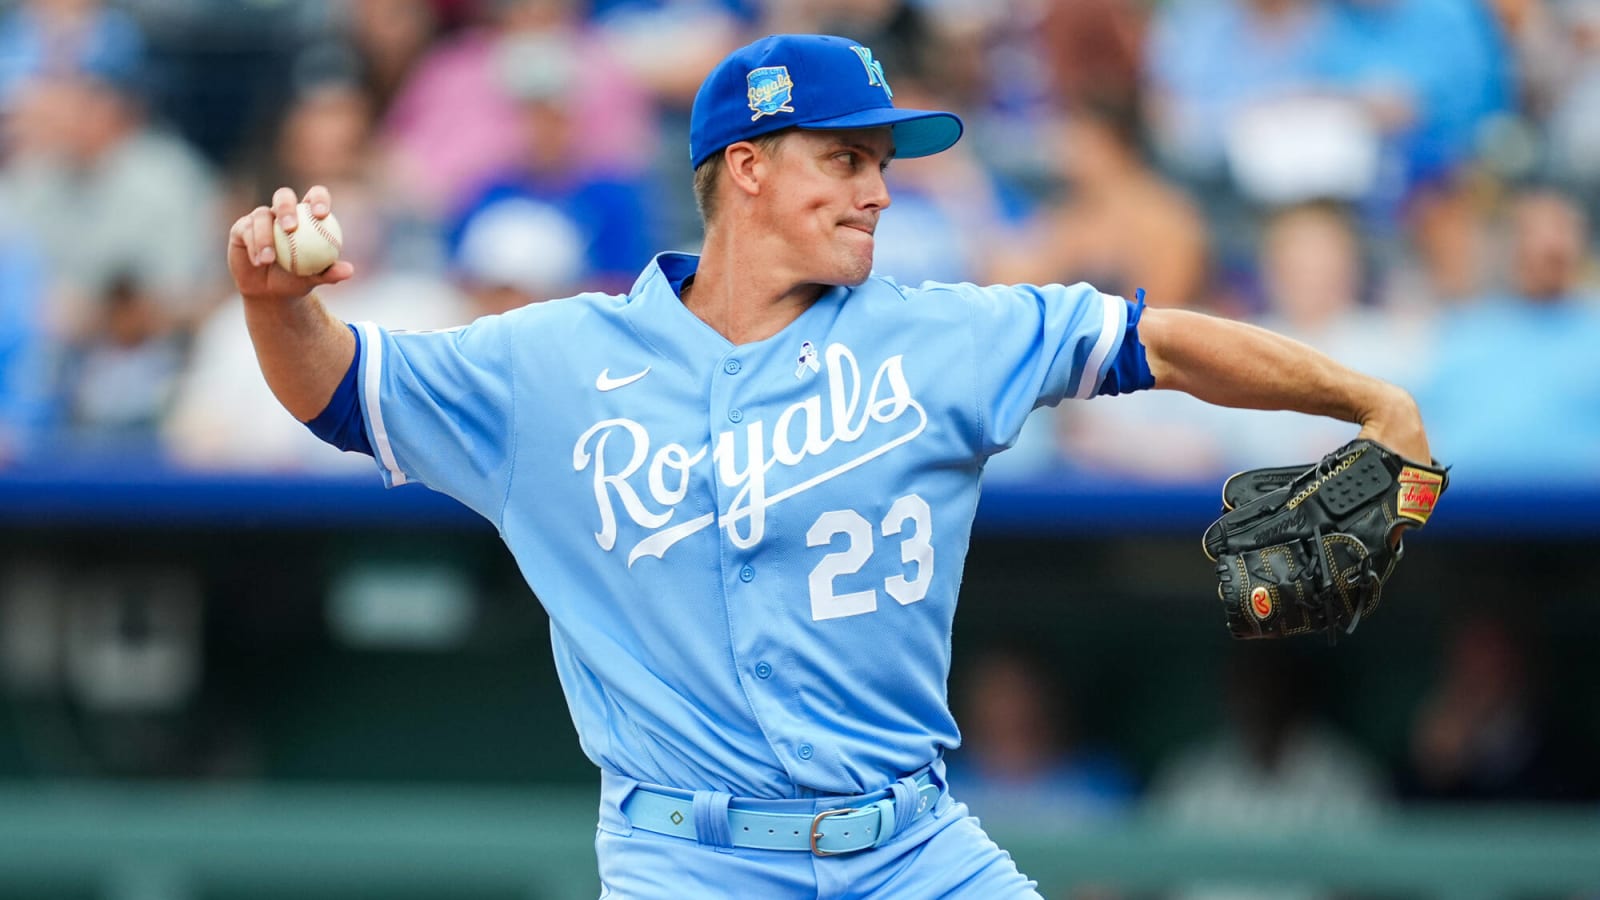 MLB best bets, strikeout props for Tuesday 7/25: Royals' Zack Greinke ripe for a fade